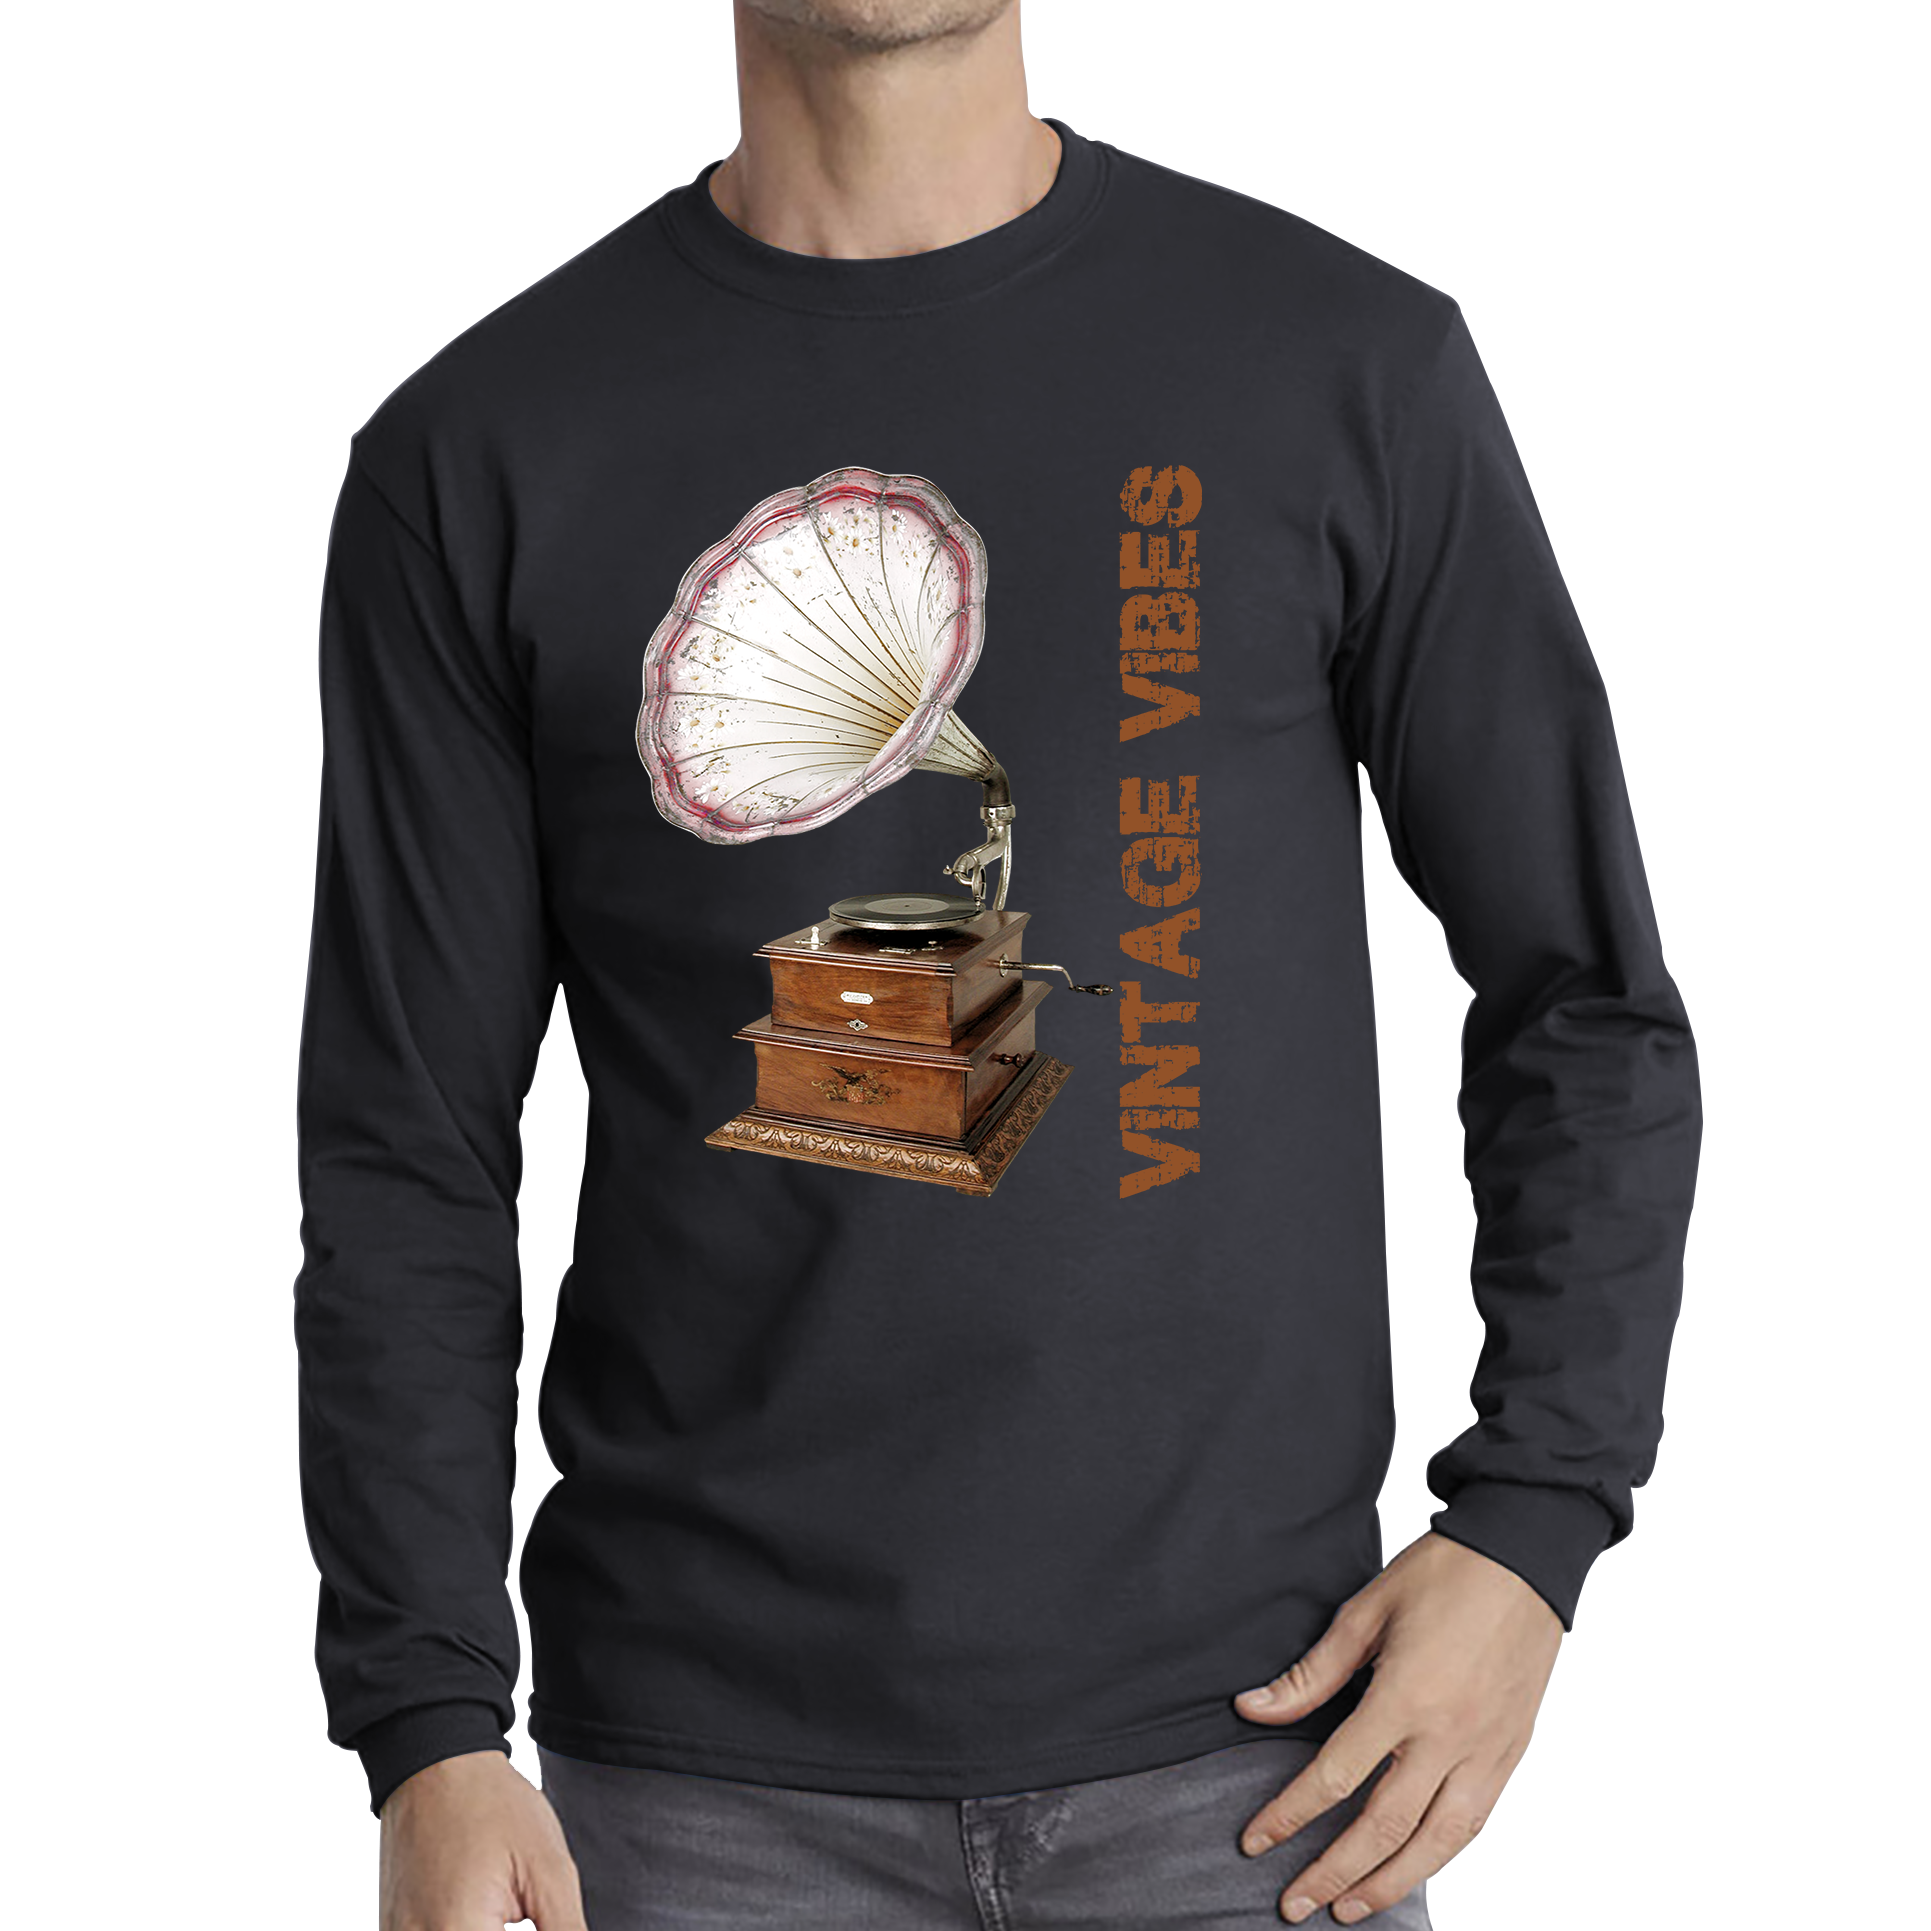 Gramophone Vintage Vibes Record Player Antique Trumpet Horn Turntable Phonograph Music Equipment Retro Long Sleeve T Shirt